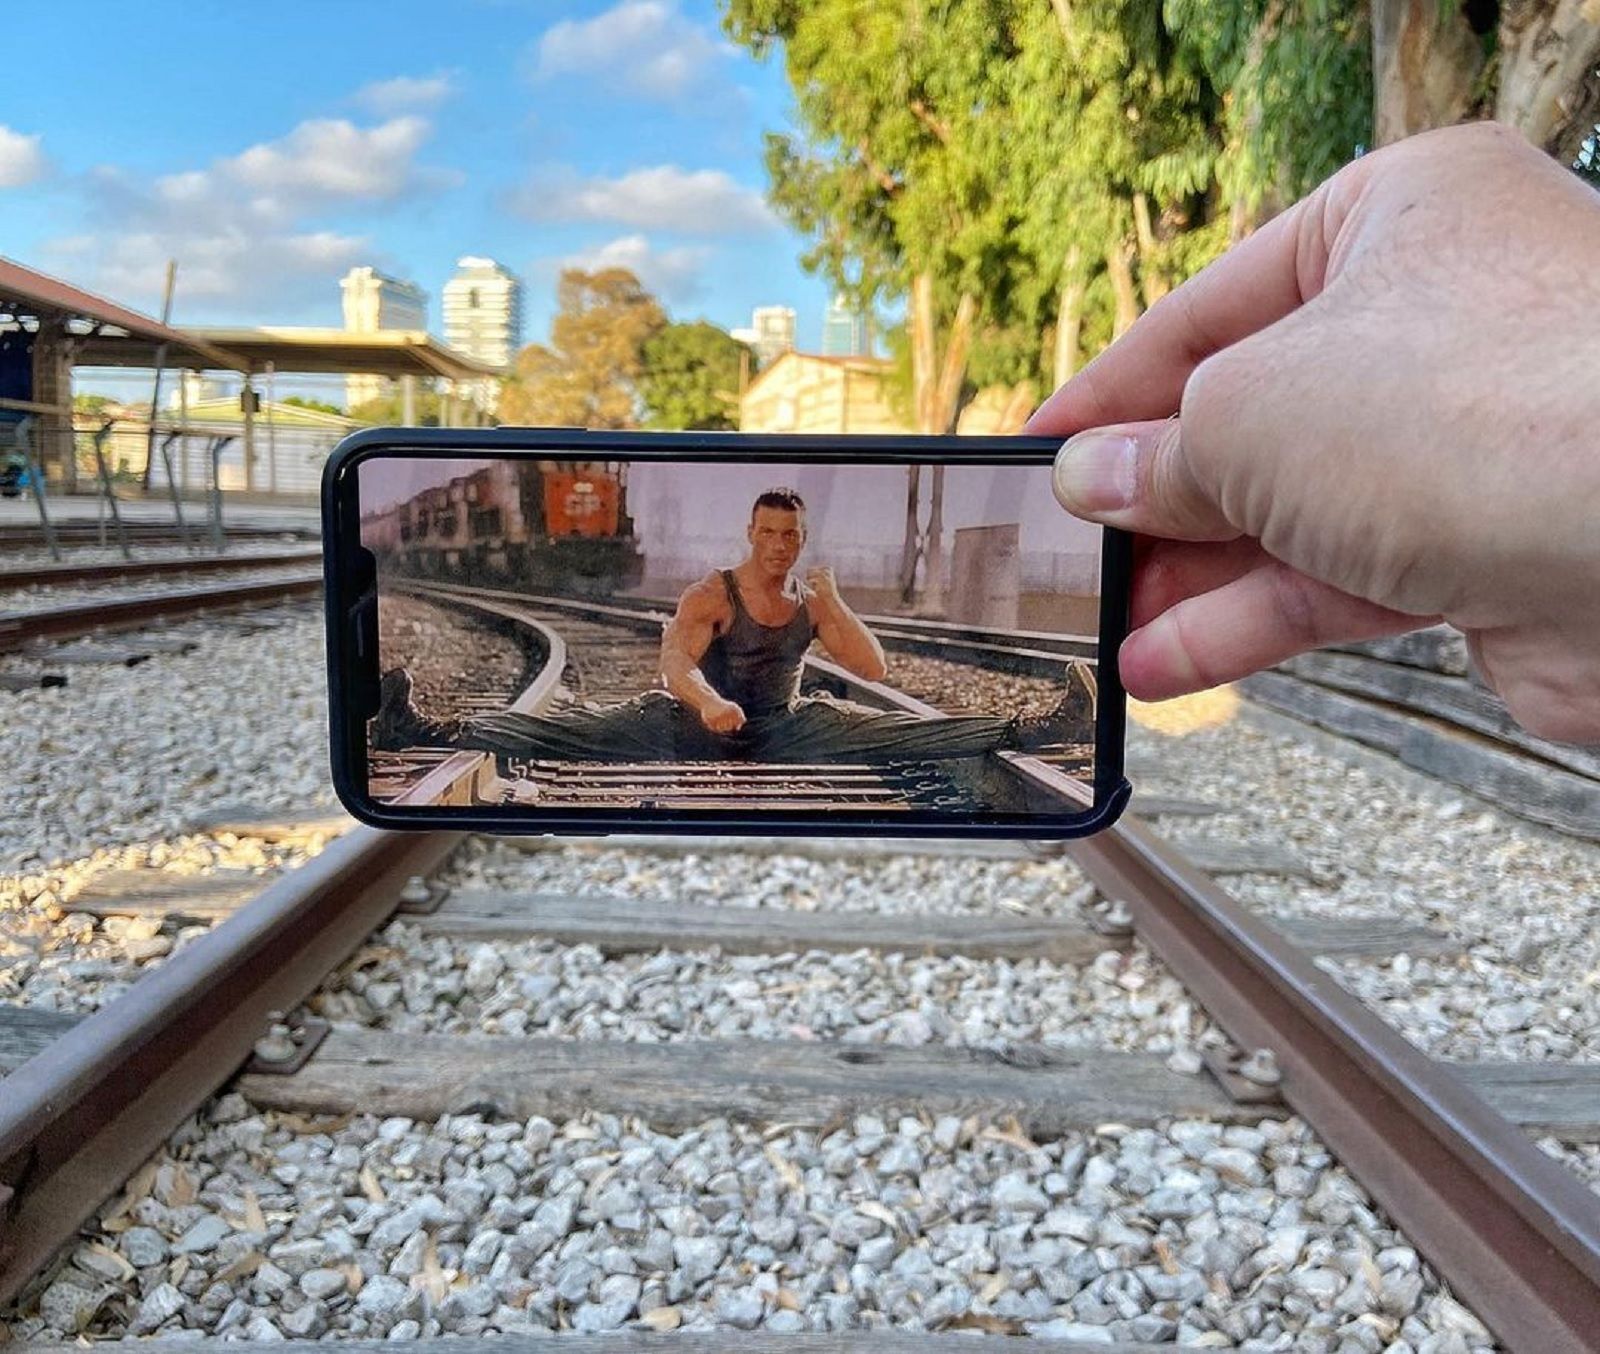 It's all about perspective with these smartphone photos photo 14